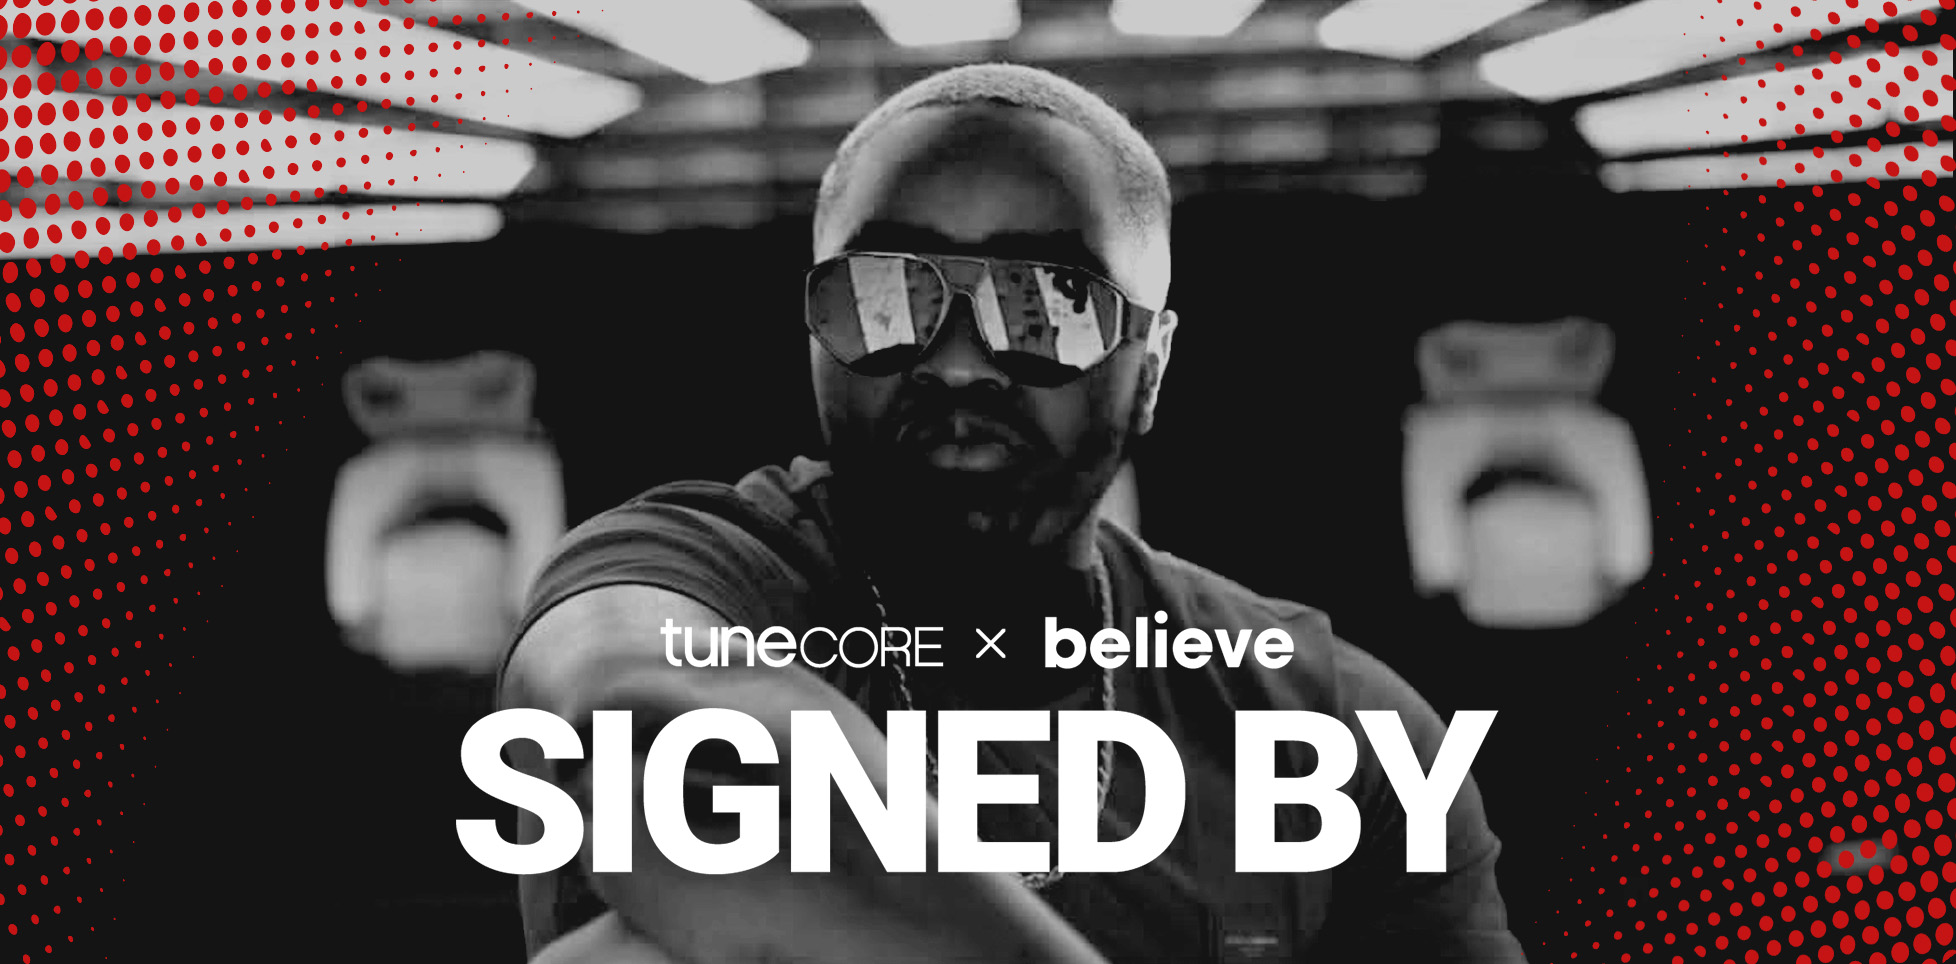 TuneCore and Believe’s Signed By program has upstreamed 340 artists since launch